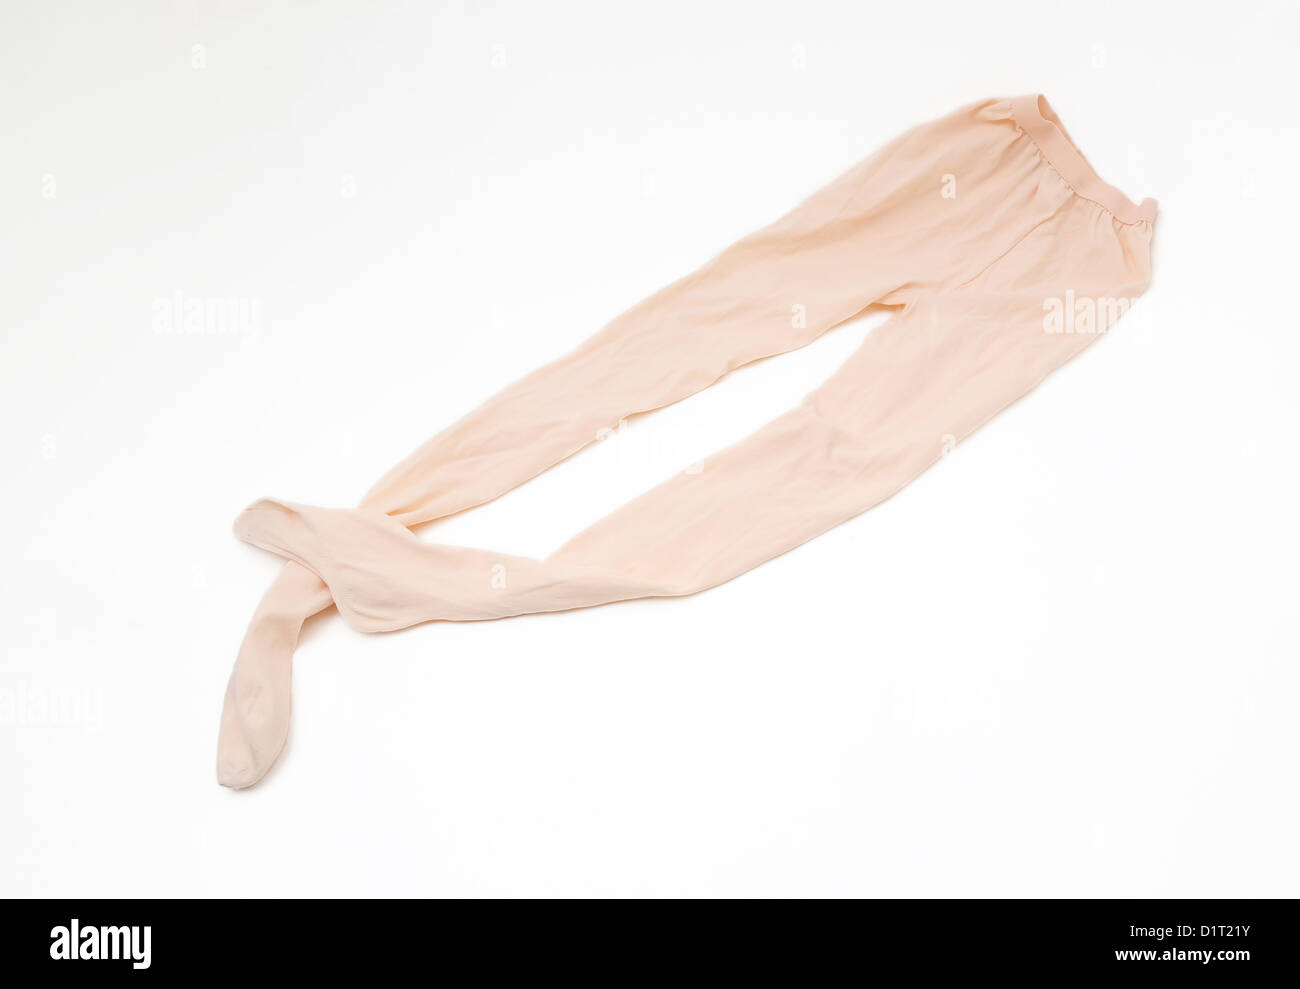 A Pair Of Pink Tights Stock Photo